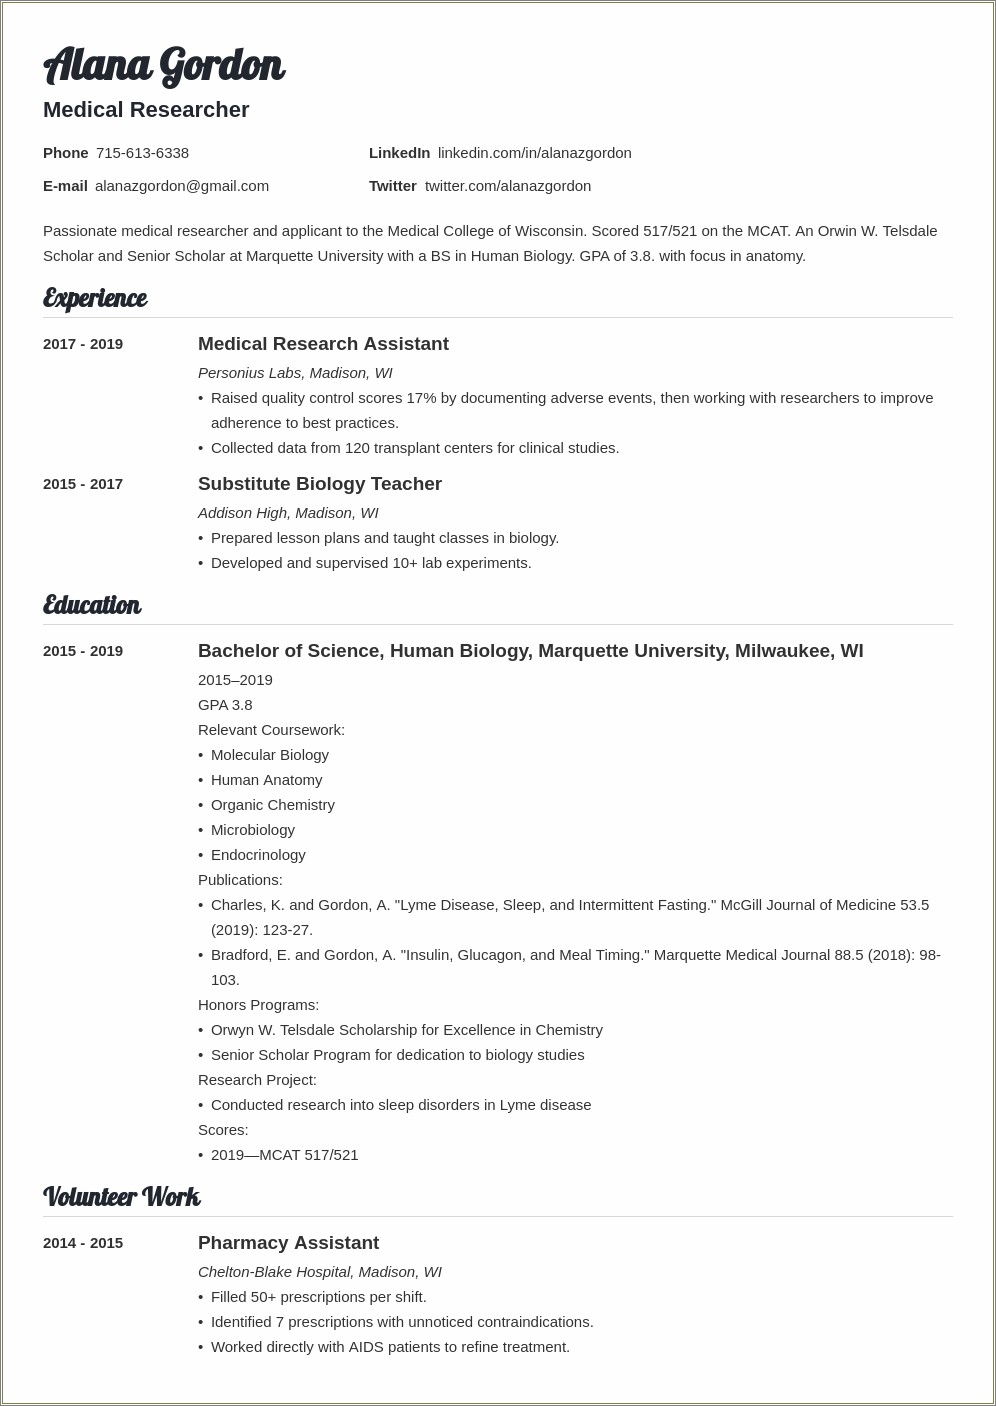 Resume Examples For Mbbs Stufying In Us